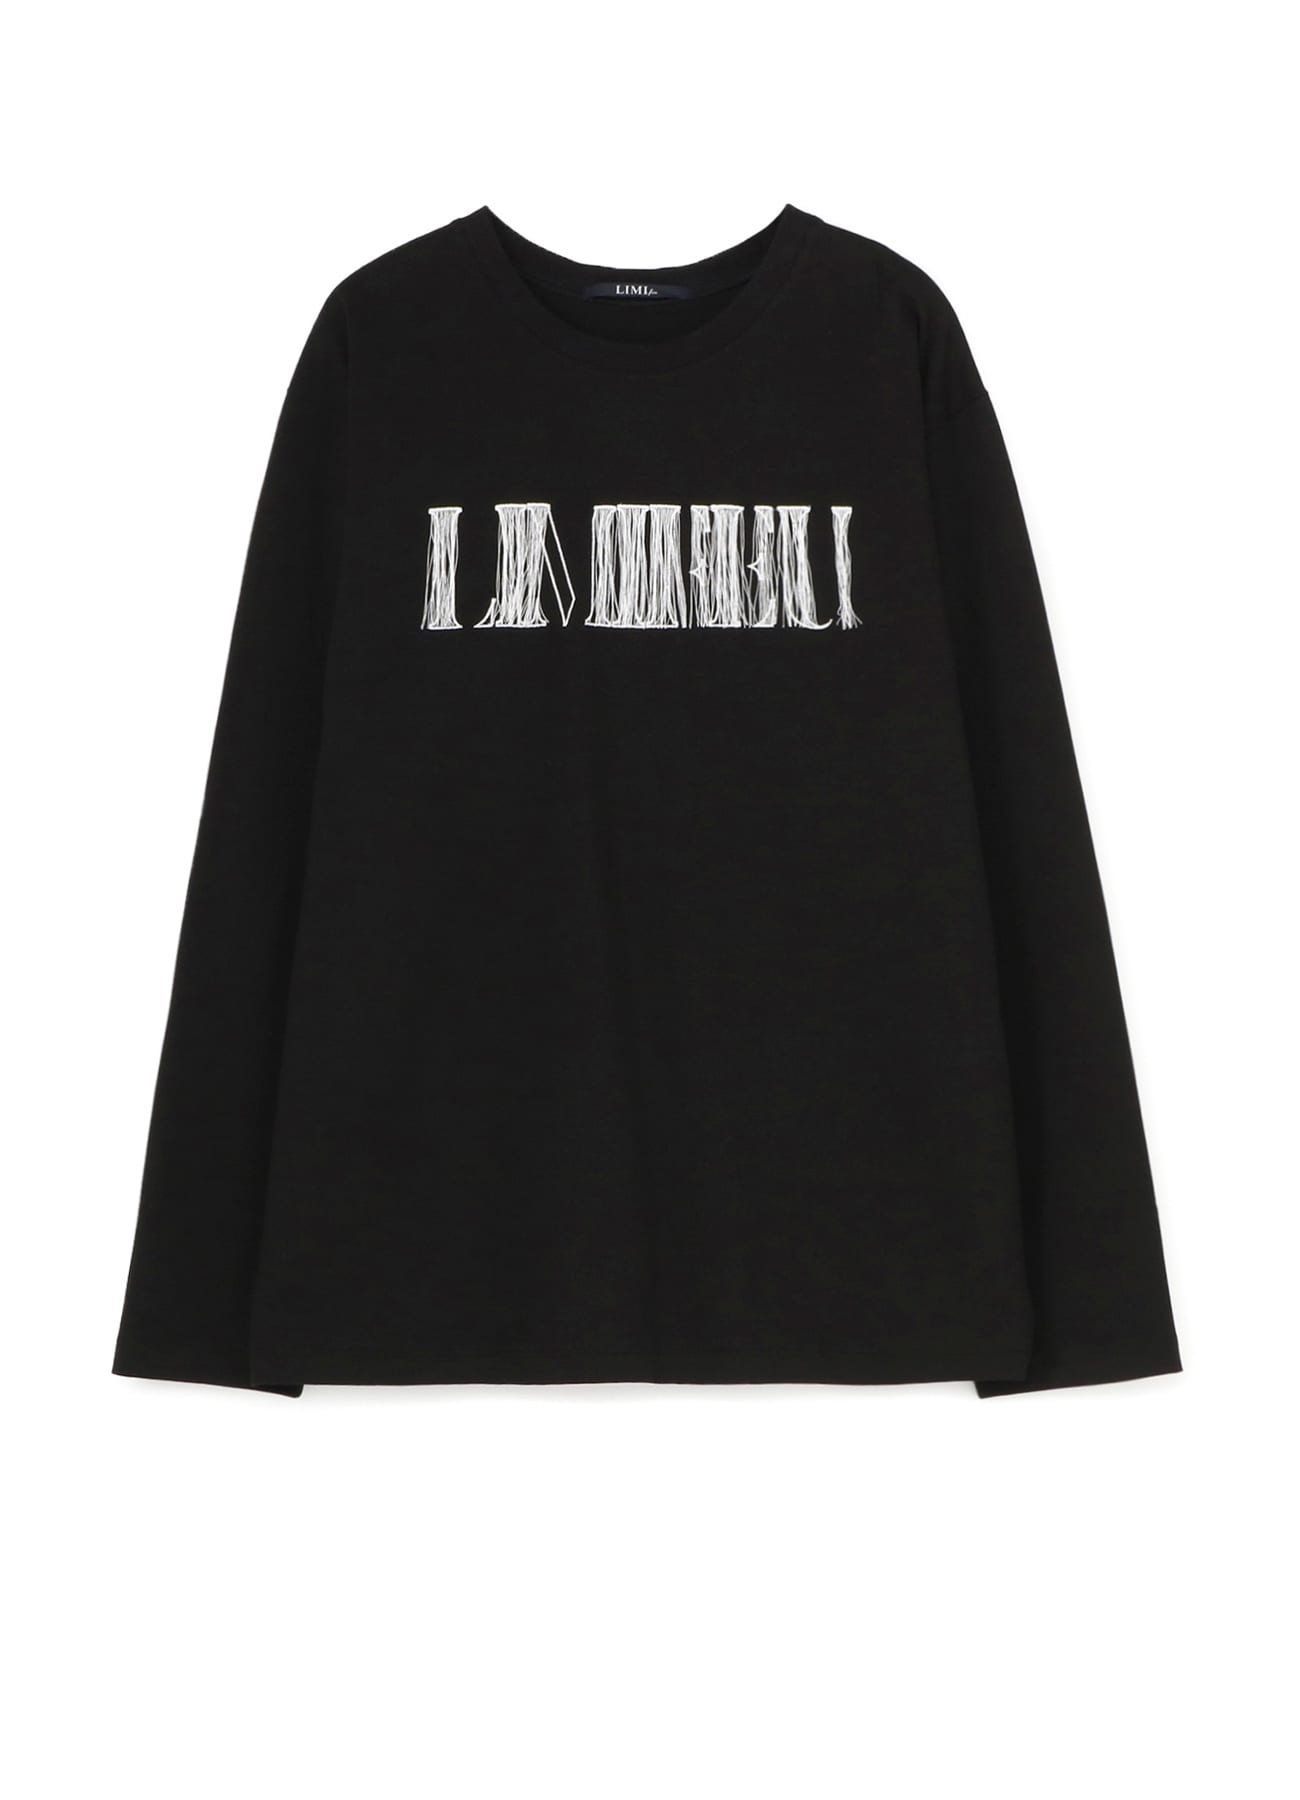 LIMI FEU Embroidery Oversize Long T(S Black): Vintage 1.1｜THE